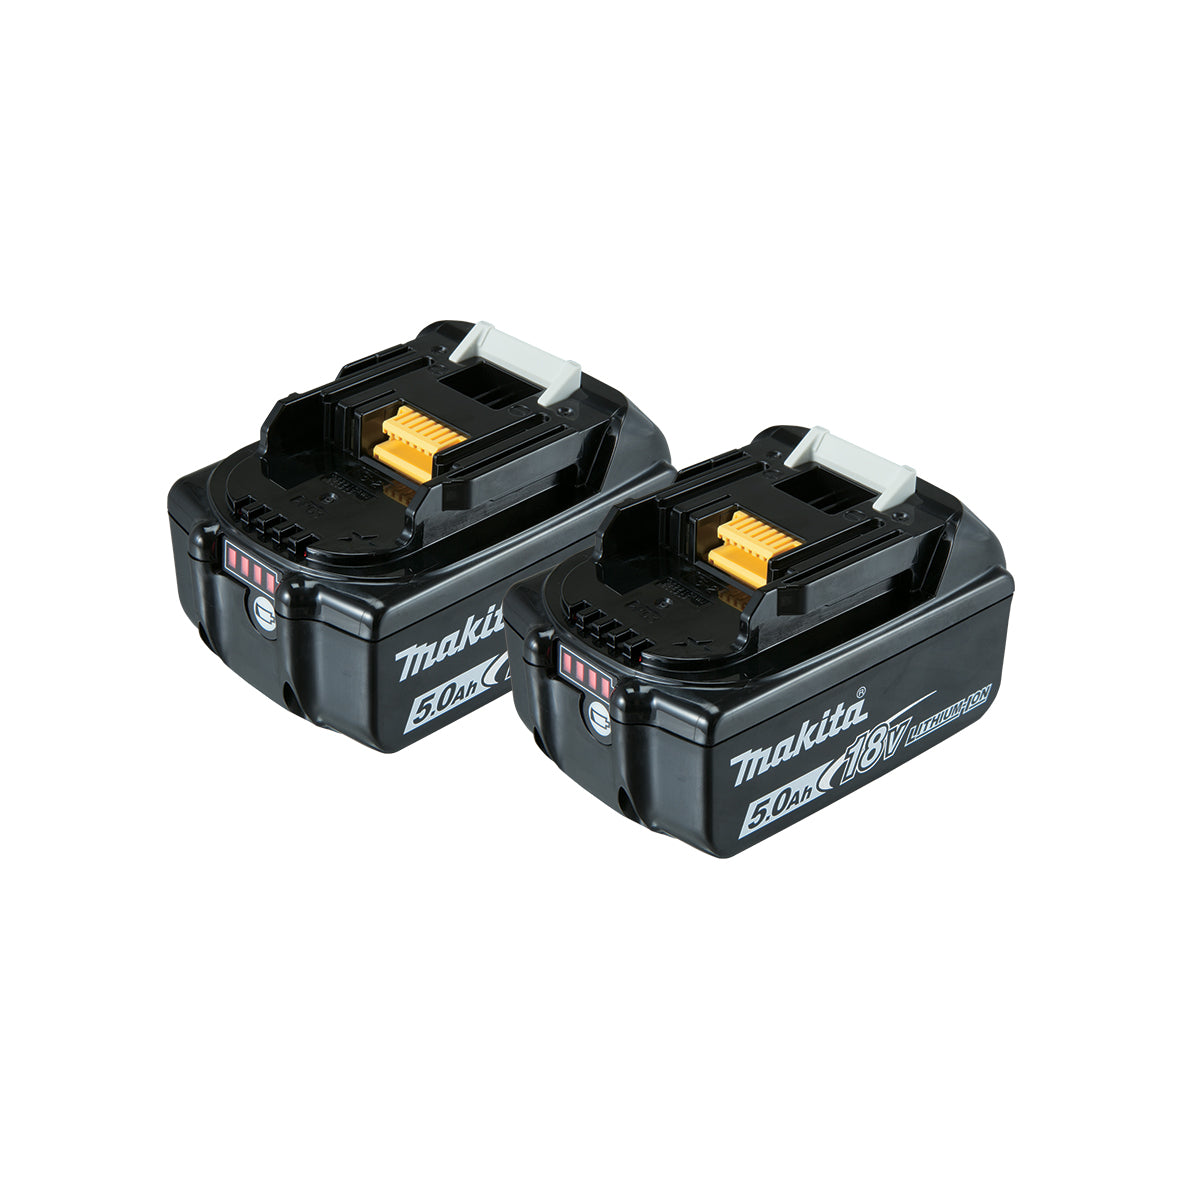 18V 5.0Ah Li-Ion Battery with Light Indicator Twin Pack 191C12-3 by Makita